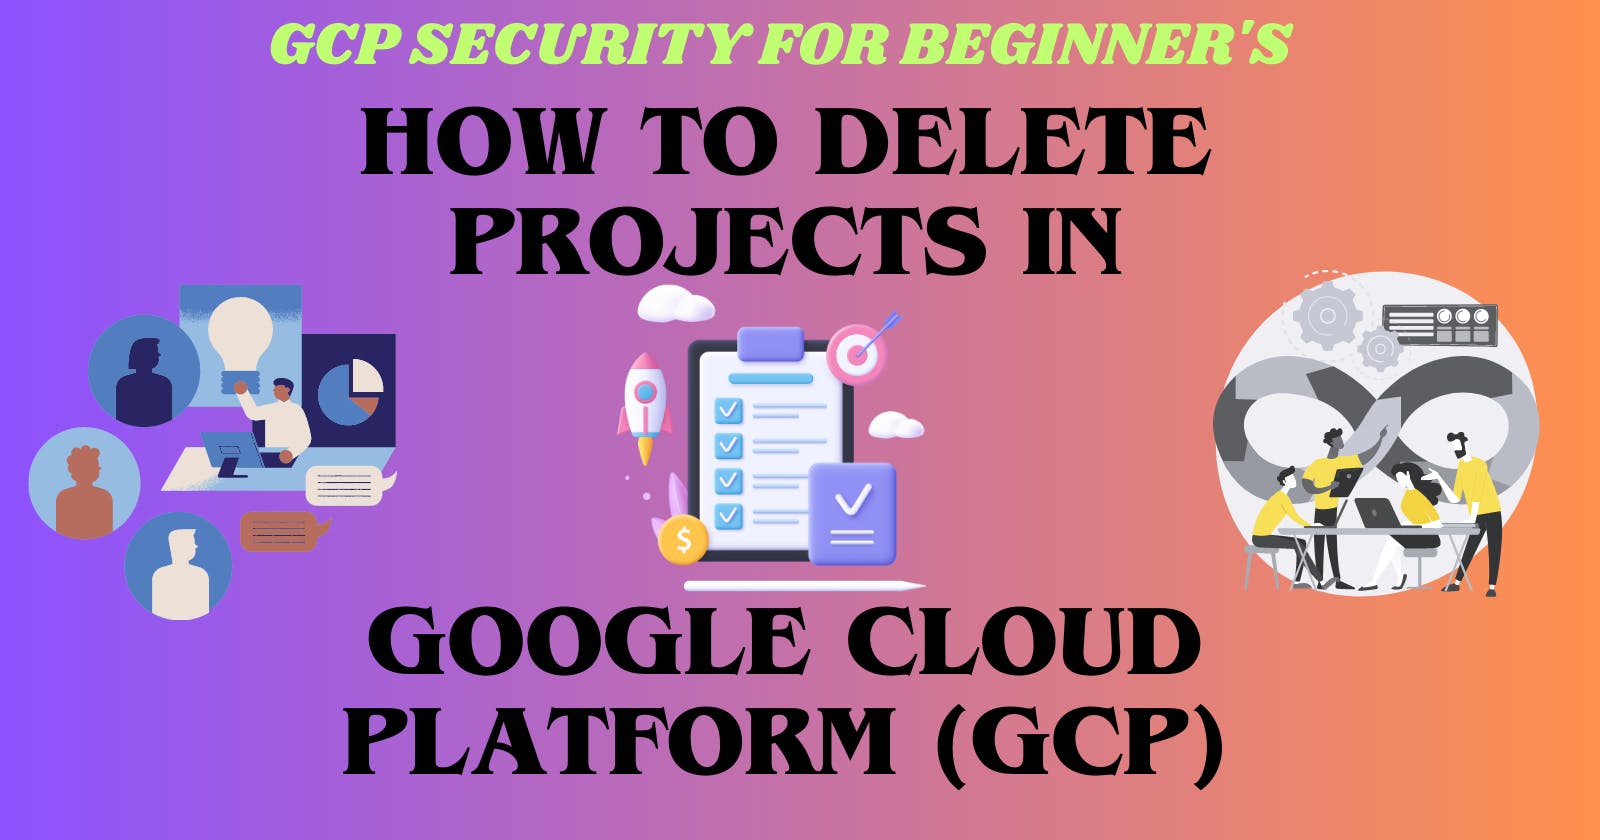 How to Delete Projects in Google Cloud Platform (GCP)